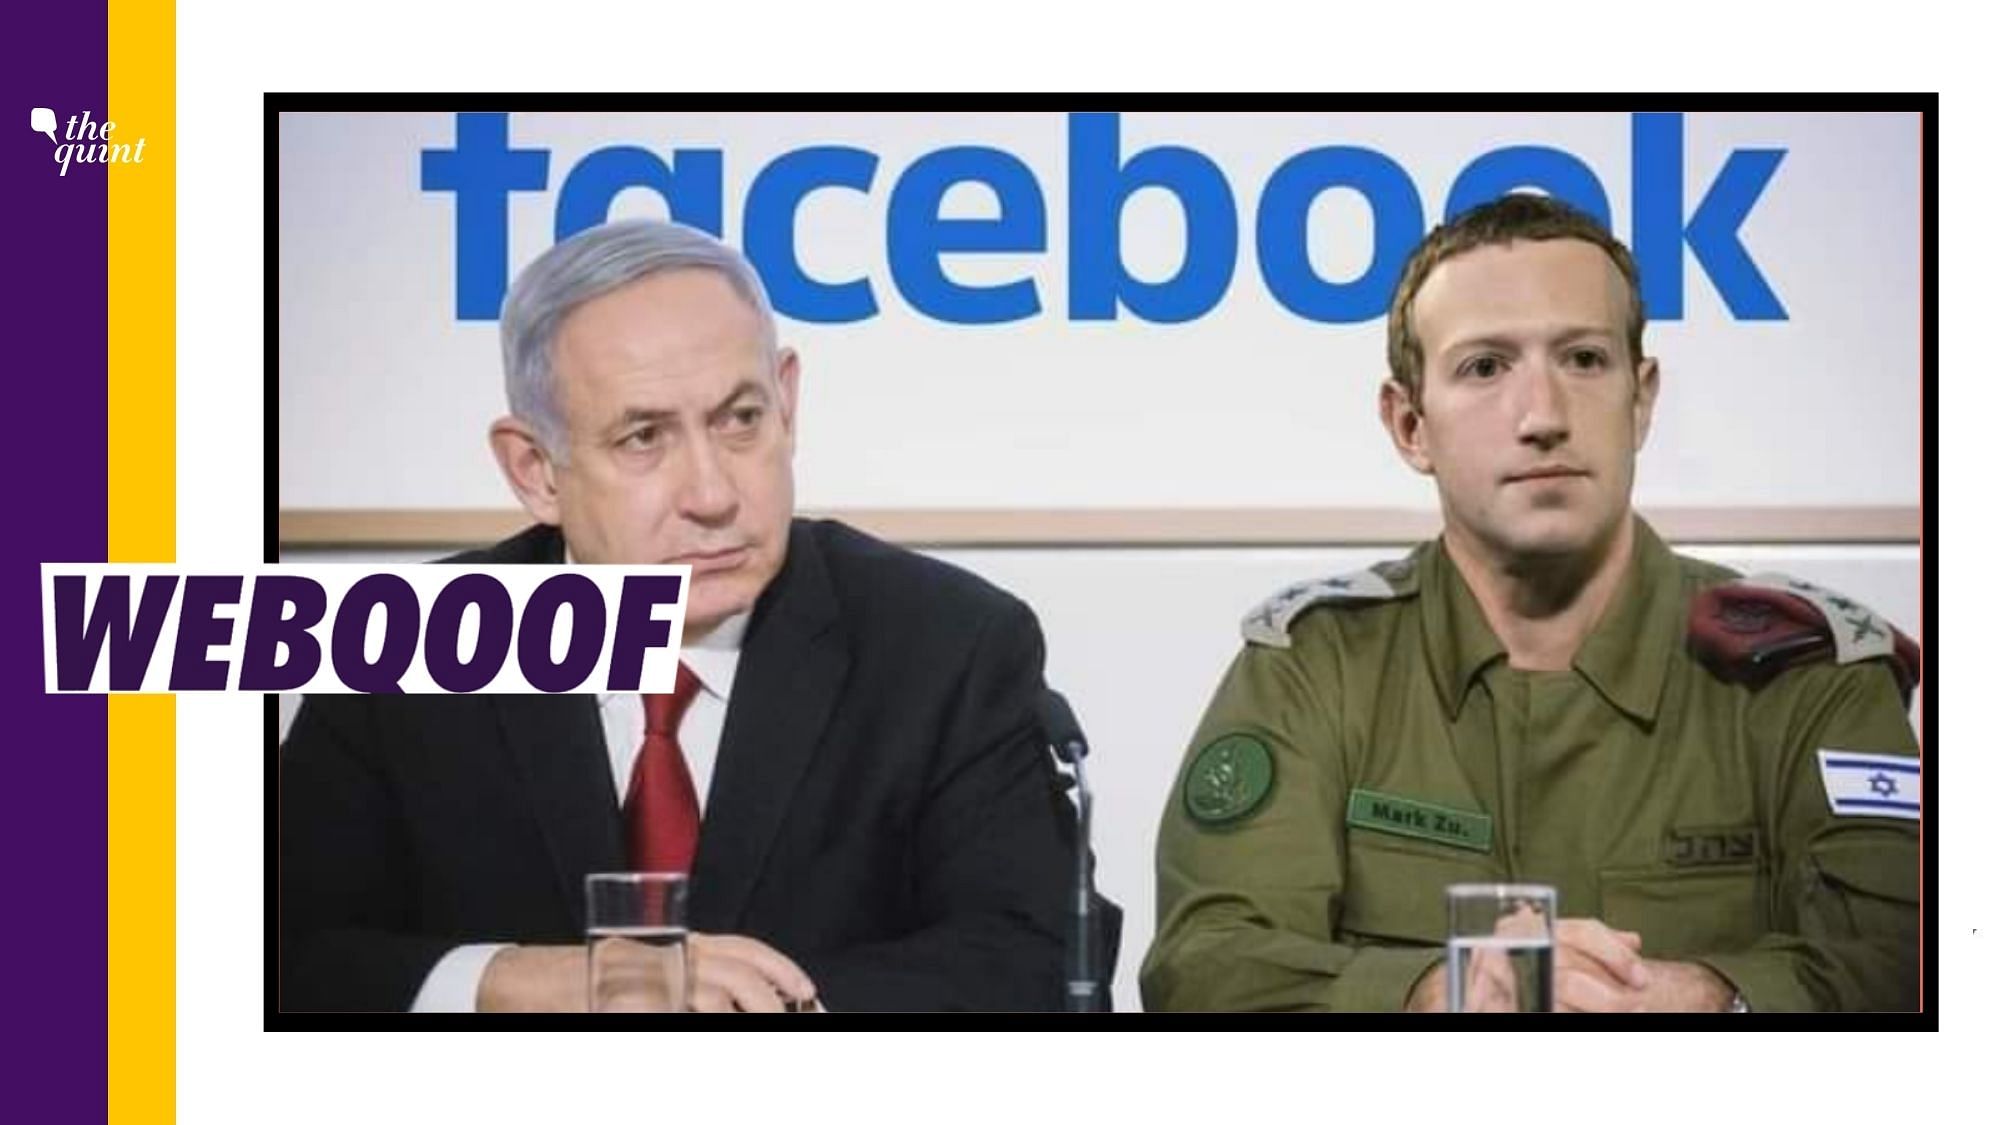 The photo is altered and Zuckerberg’s face is morphed on top of IDF chief of Staff Aviv Kohavi’ face.